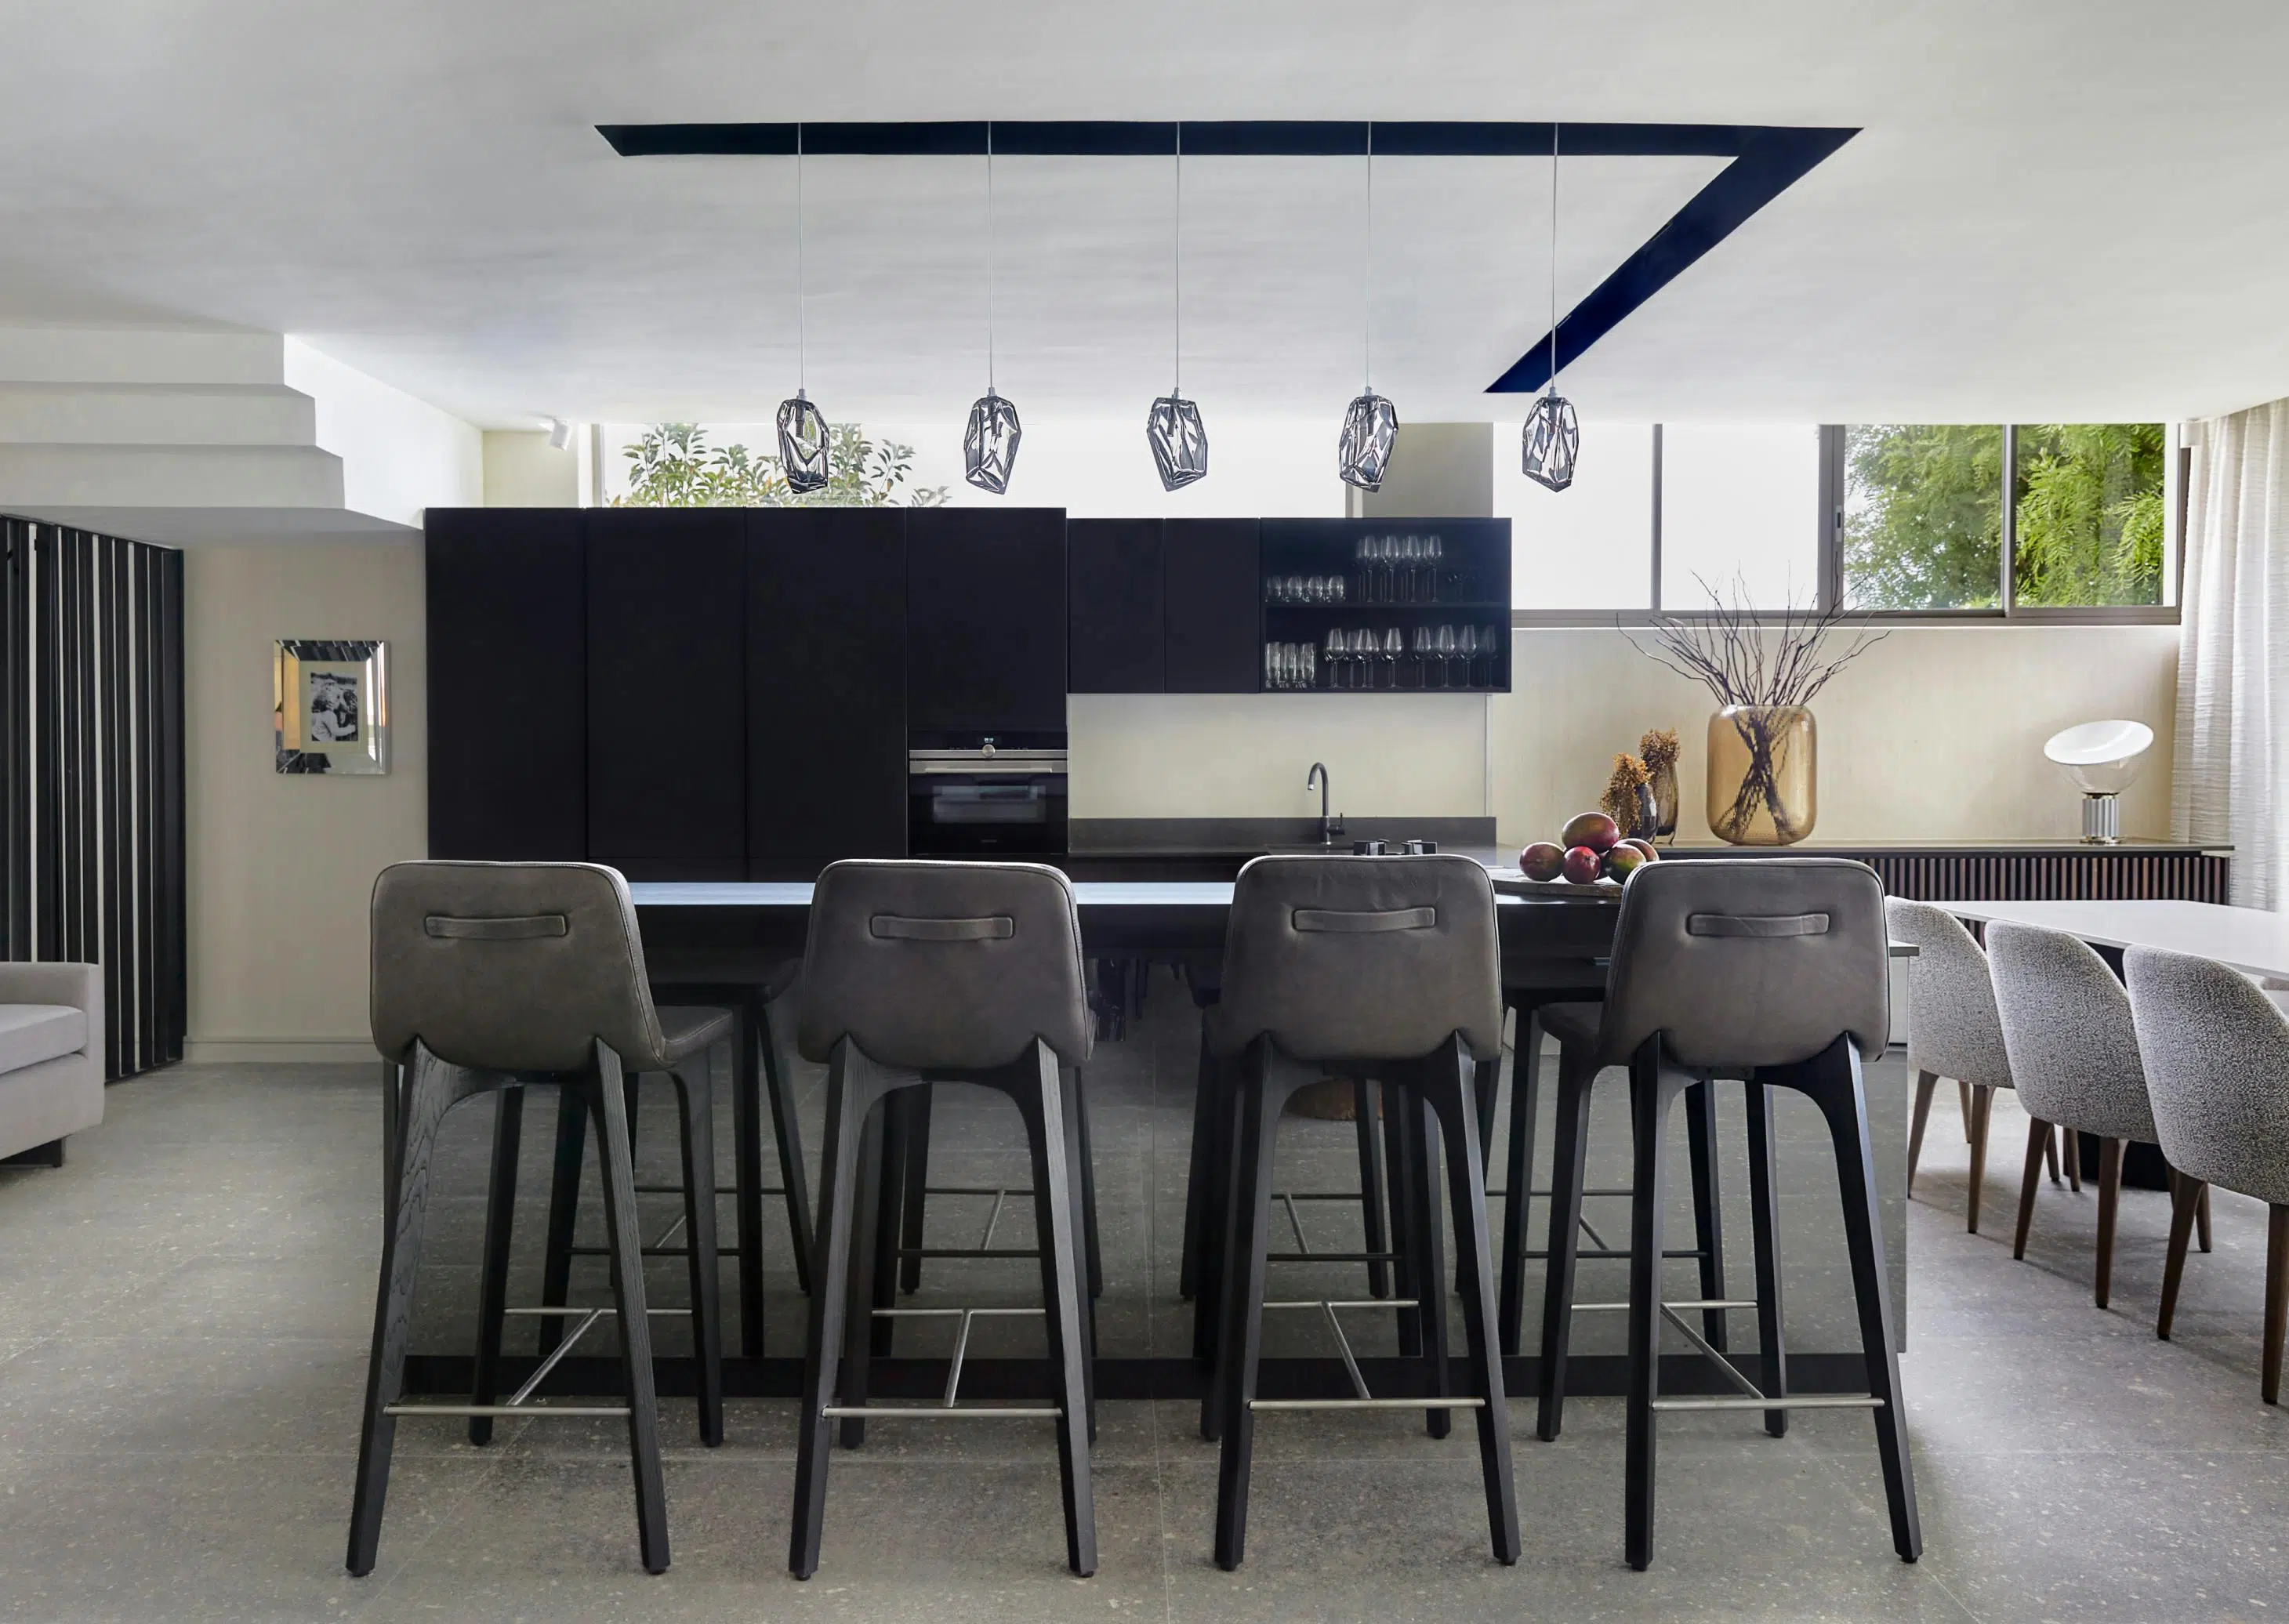 Four black barstools in the foreground with the kitchen in the background with a dining table and grey dining chairs to the right.